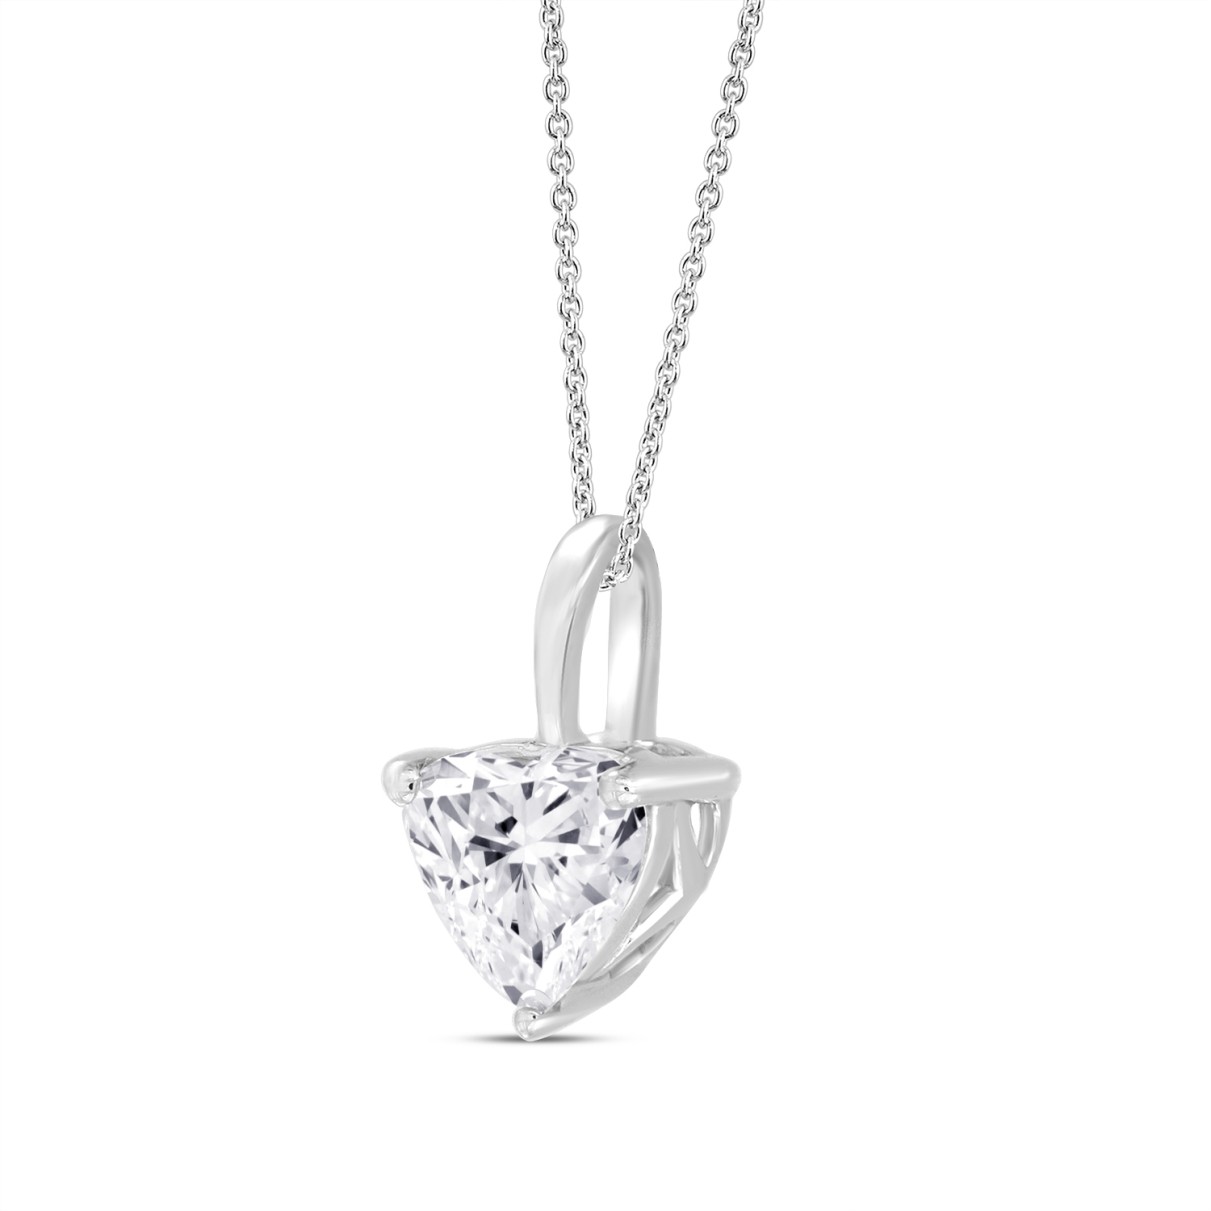 LADIES SOLITAIRE PENDANT WITH CHAIN 1 1/2CT HEART DIAMOND 14K WHITE GOLD